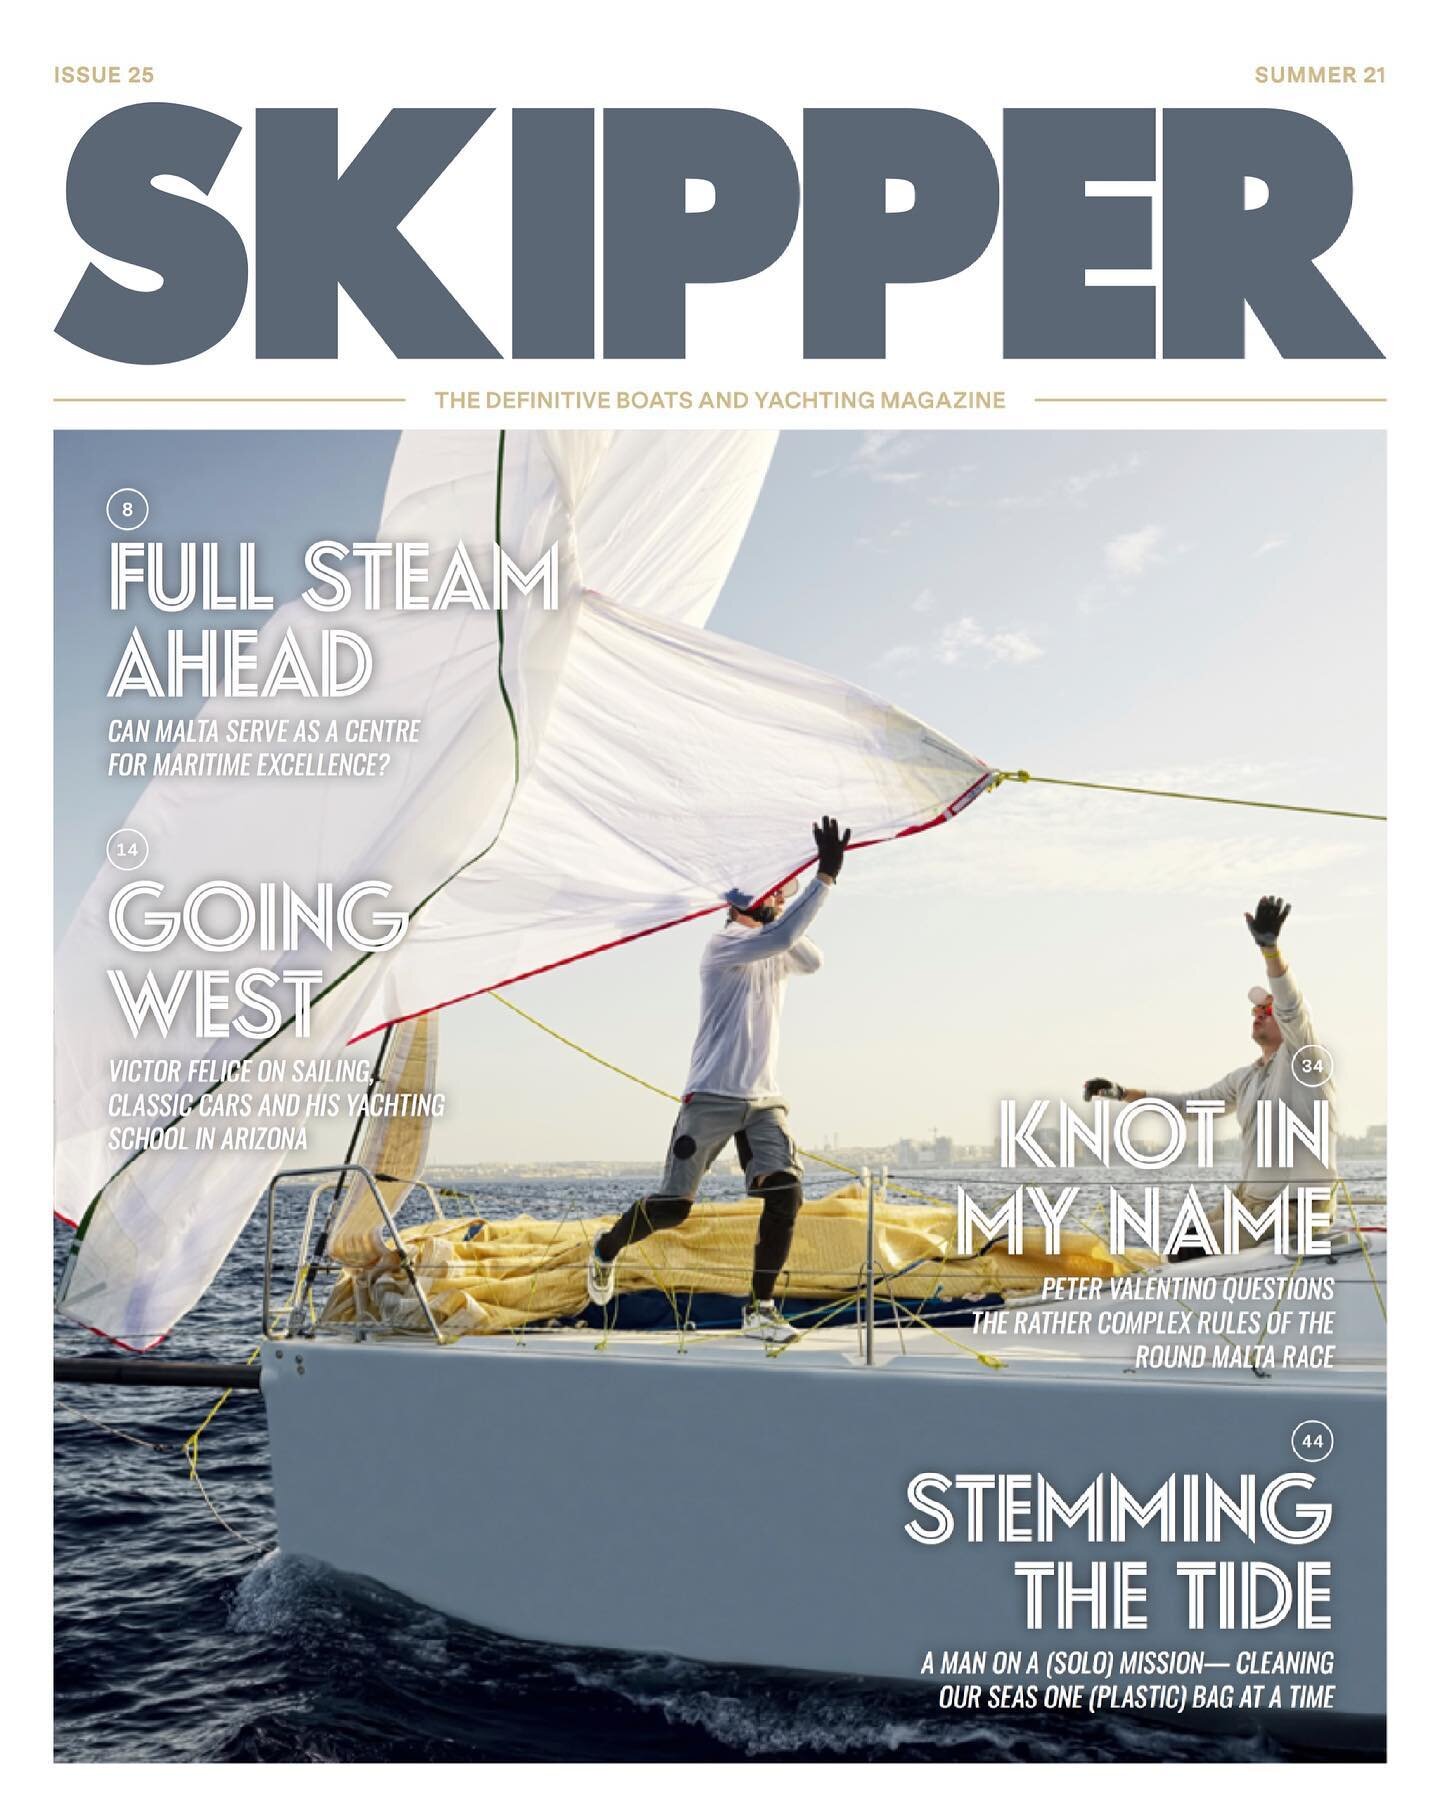 .
The summer edition is up and loaded. Be the first to read the online version! 🛥⚓️😎
.
🖥📱bit.ly/Skipper25 👈🏻 🙌🏻
.
#skippermag #yachtingmalta #transportmalta #maltaflag #cleanseas #roundmaltarace #xyachts #karnic